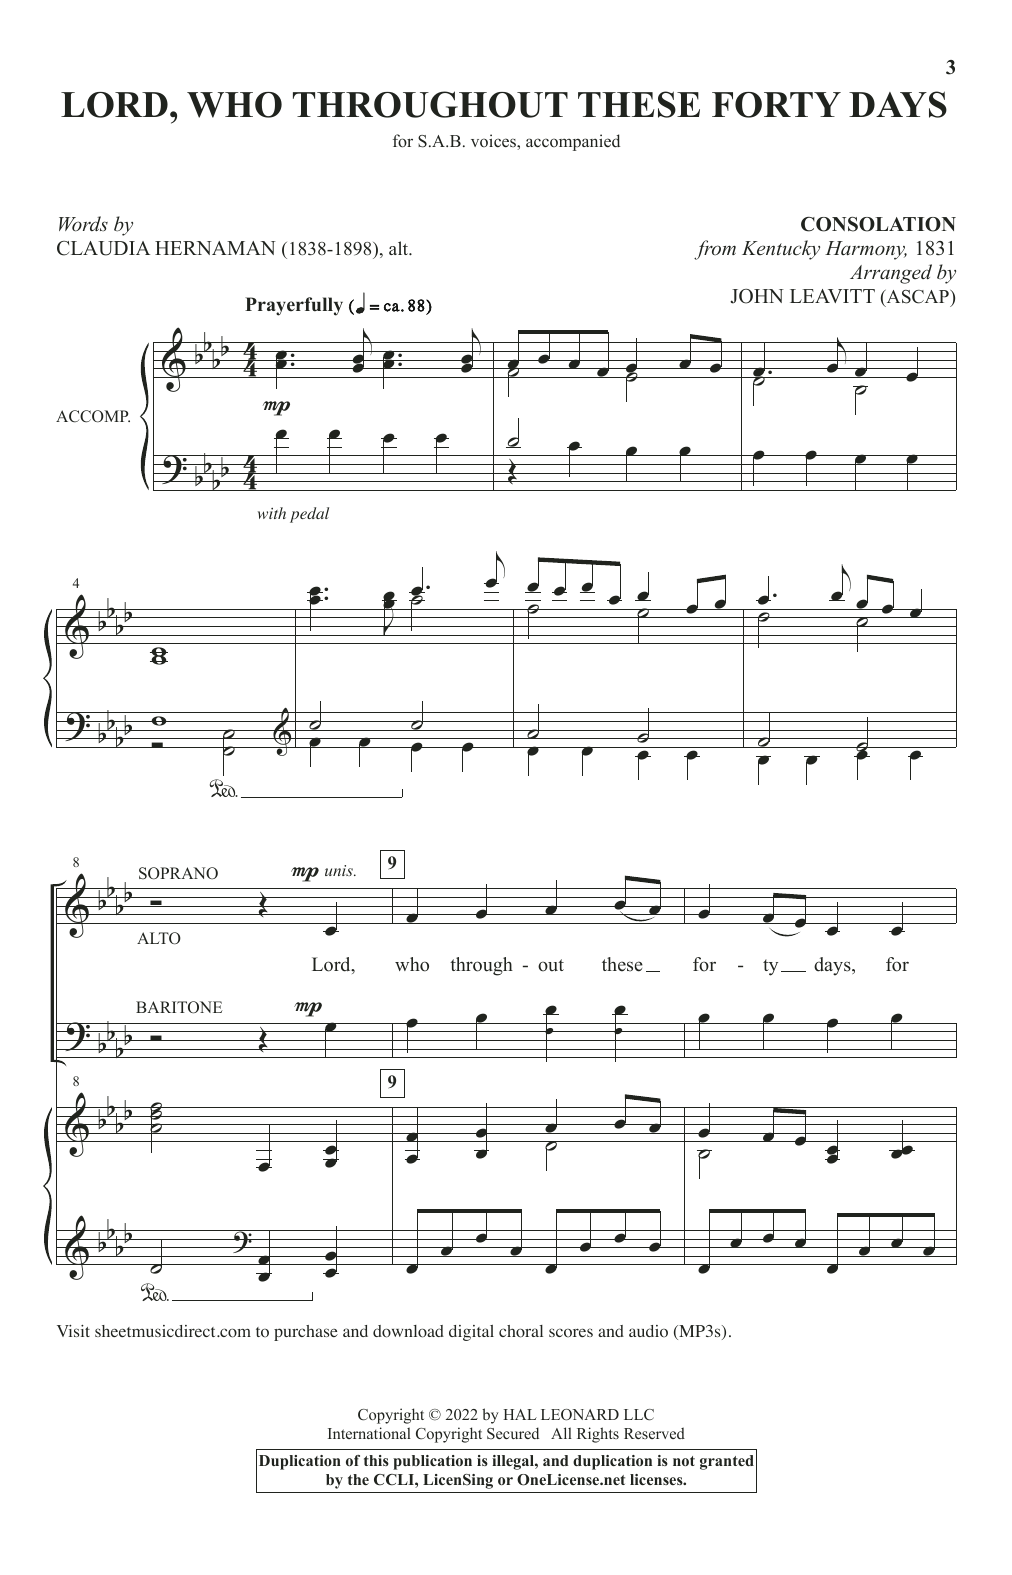 Download Claudia Hernaman Lord, Who Throughout These Forty Days ( Sheet Music